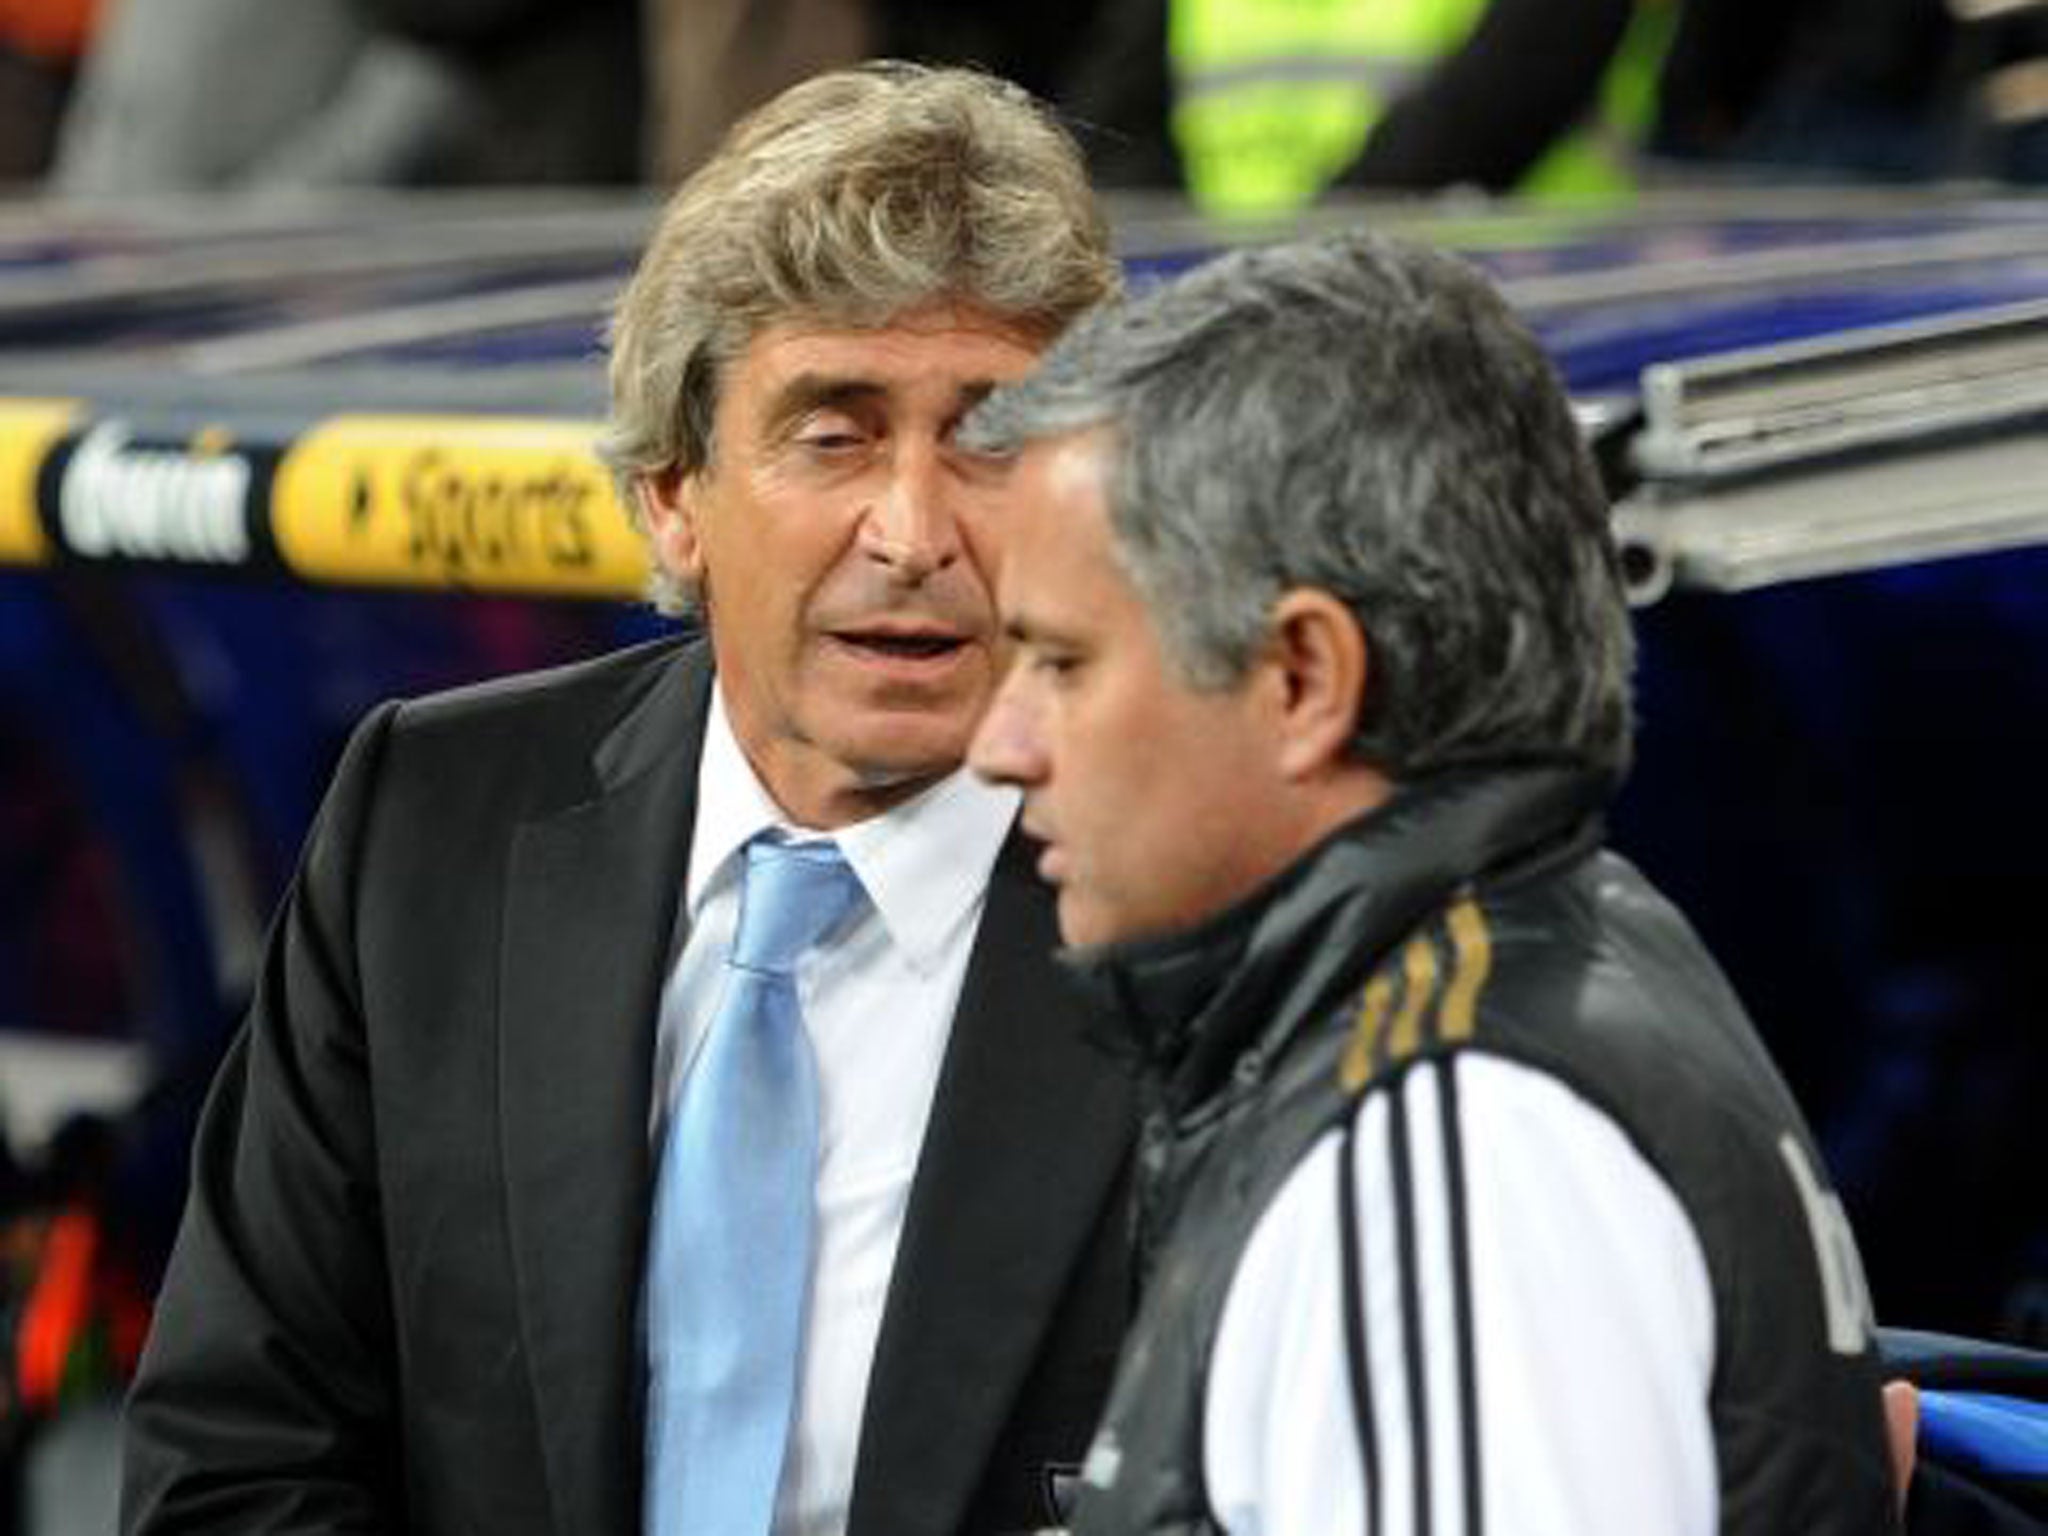 Manuel Pellegrini, then Malaga manager, shakes hands with Jose Mourinho who had taken over from him at Real Madrid